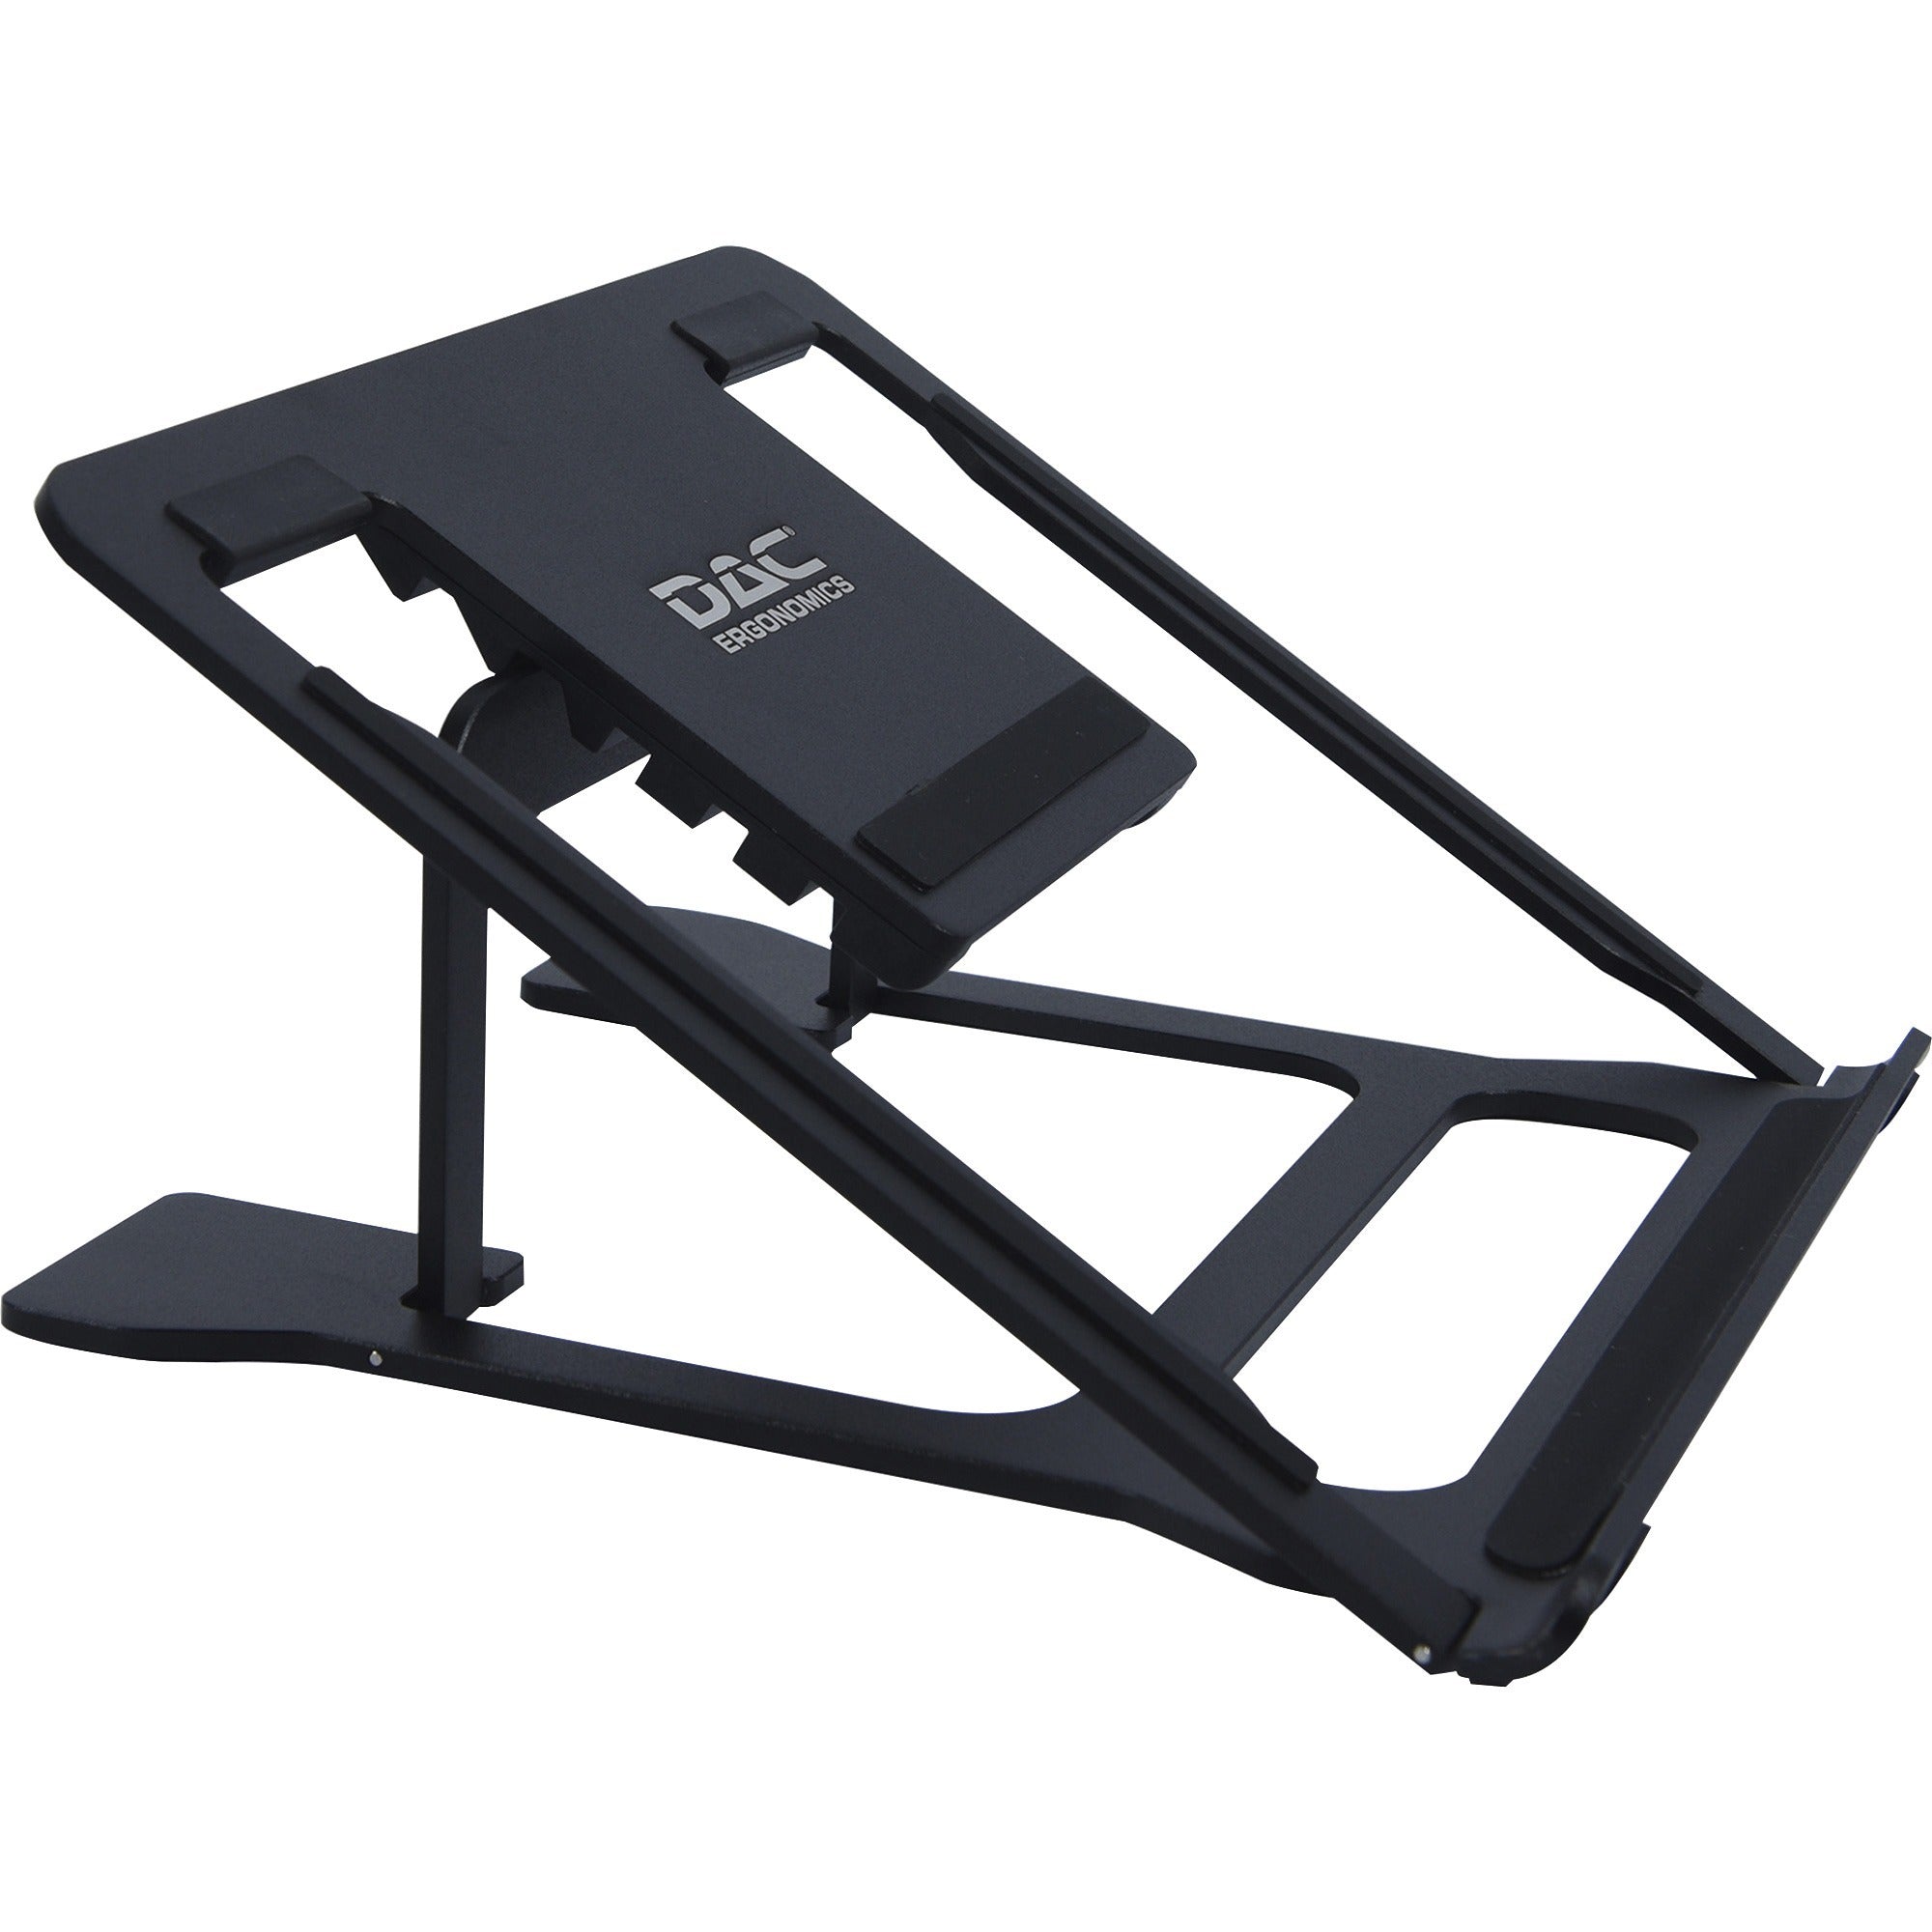 dac-portable-laptop-stand-with-6-height-levels-notebook-tablet-support-aluminum-alloy-black_dta21688 - 1